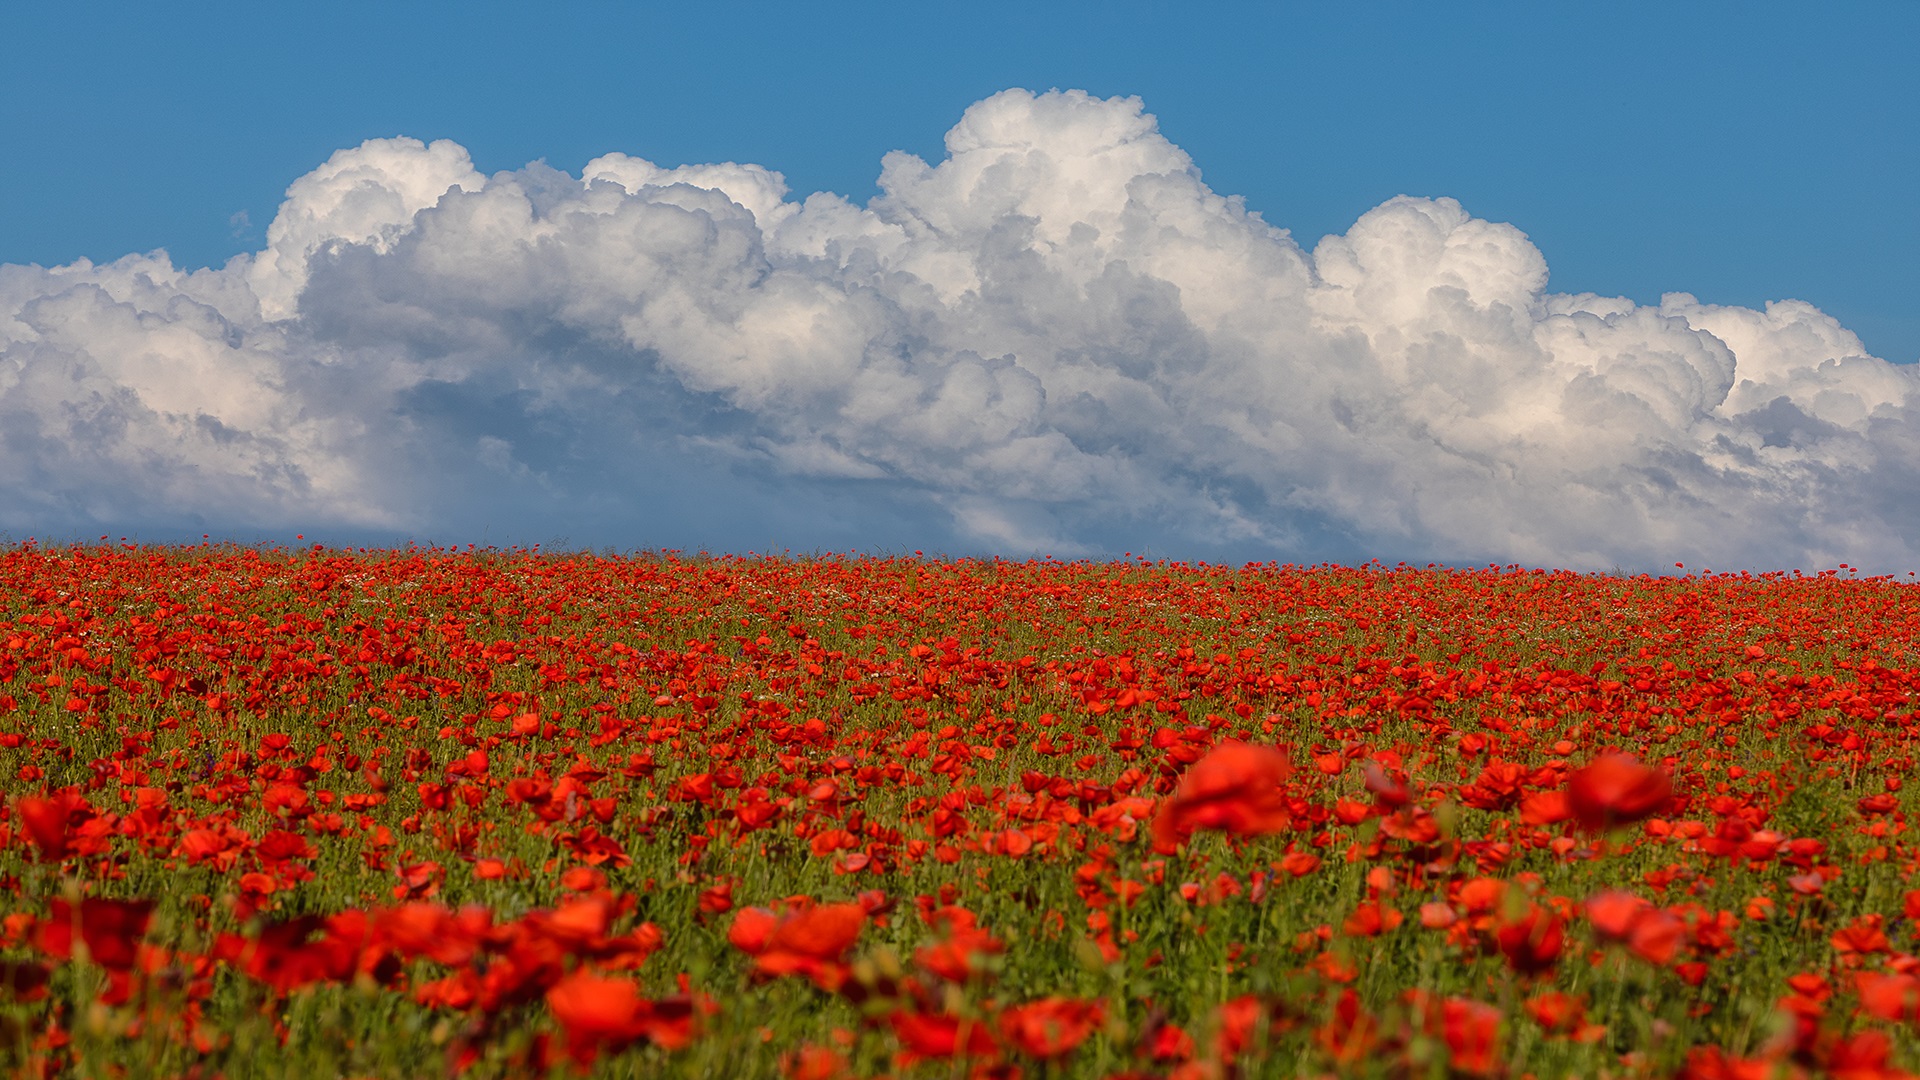 Flowers Plants Minimalism Clouds Red Blue White Outdoors Nature Field Alexander Pashenichev 1920x1080